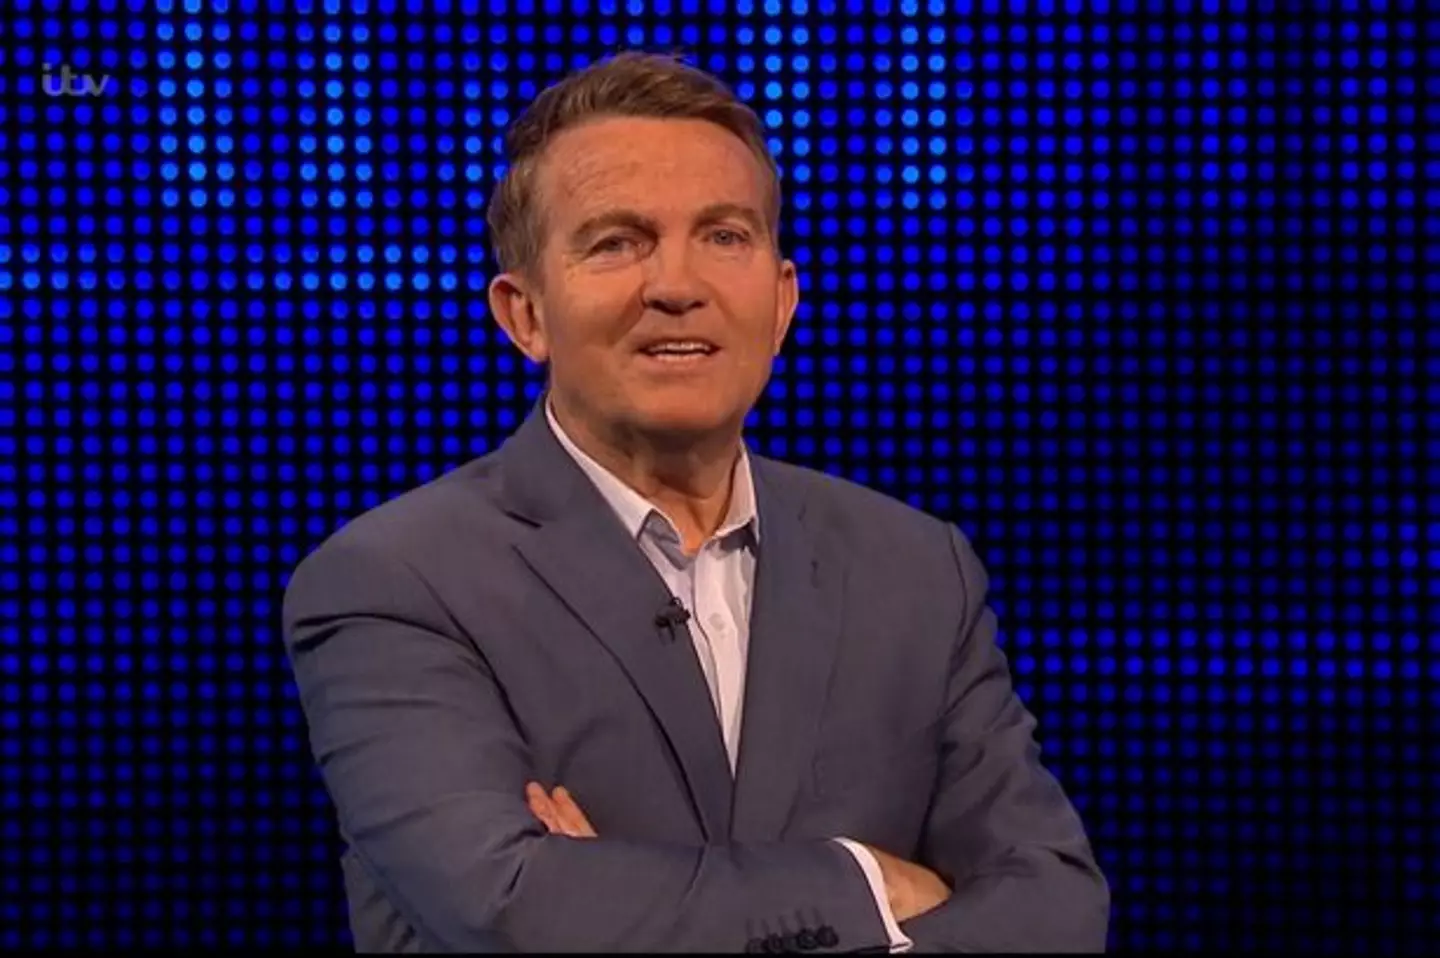 Bradley Walsh usually does a pretty good job, but sometimes The Chase has accidents.